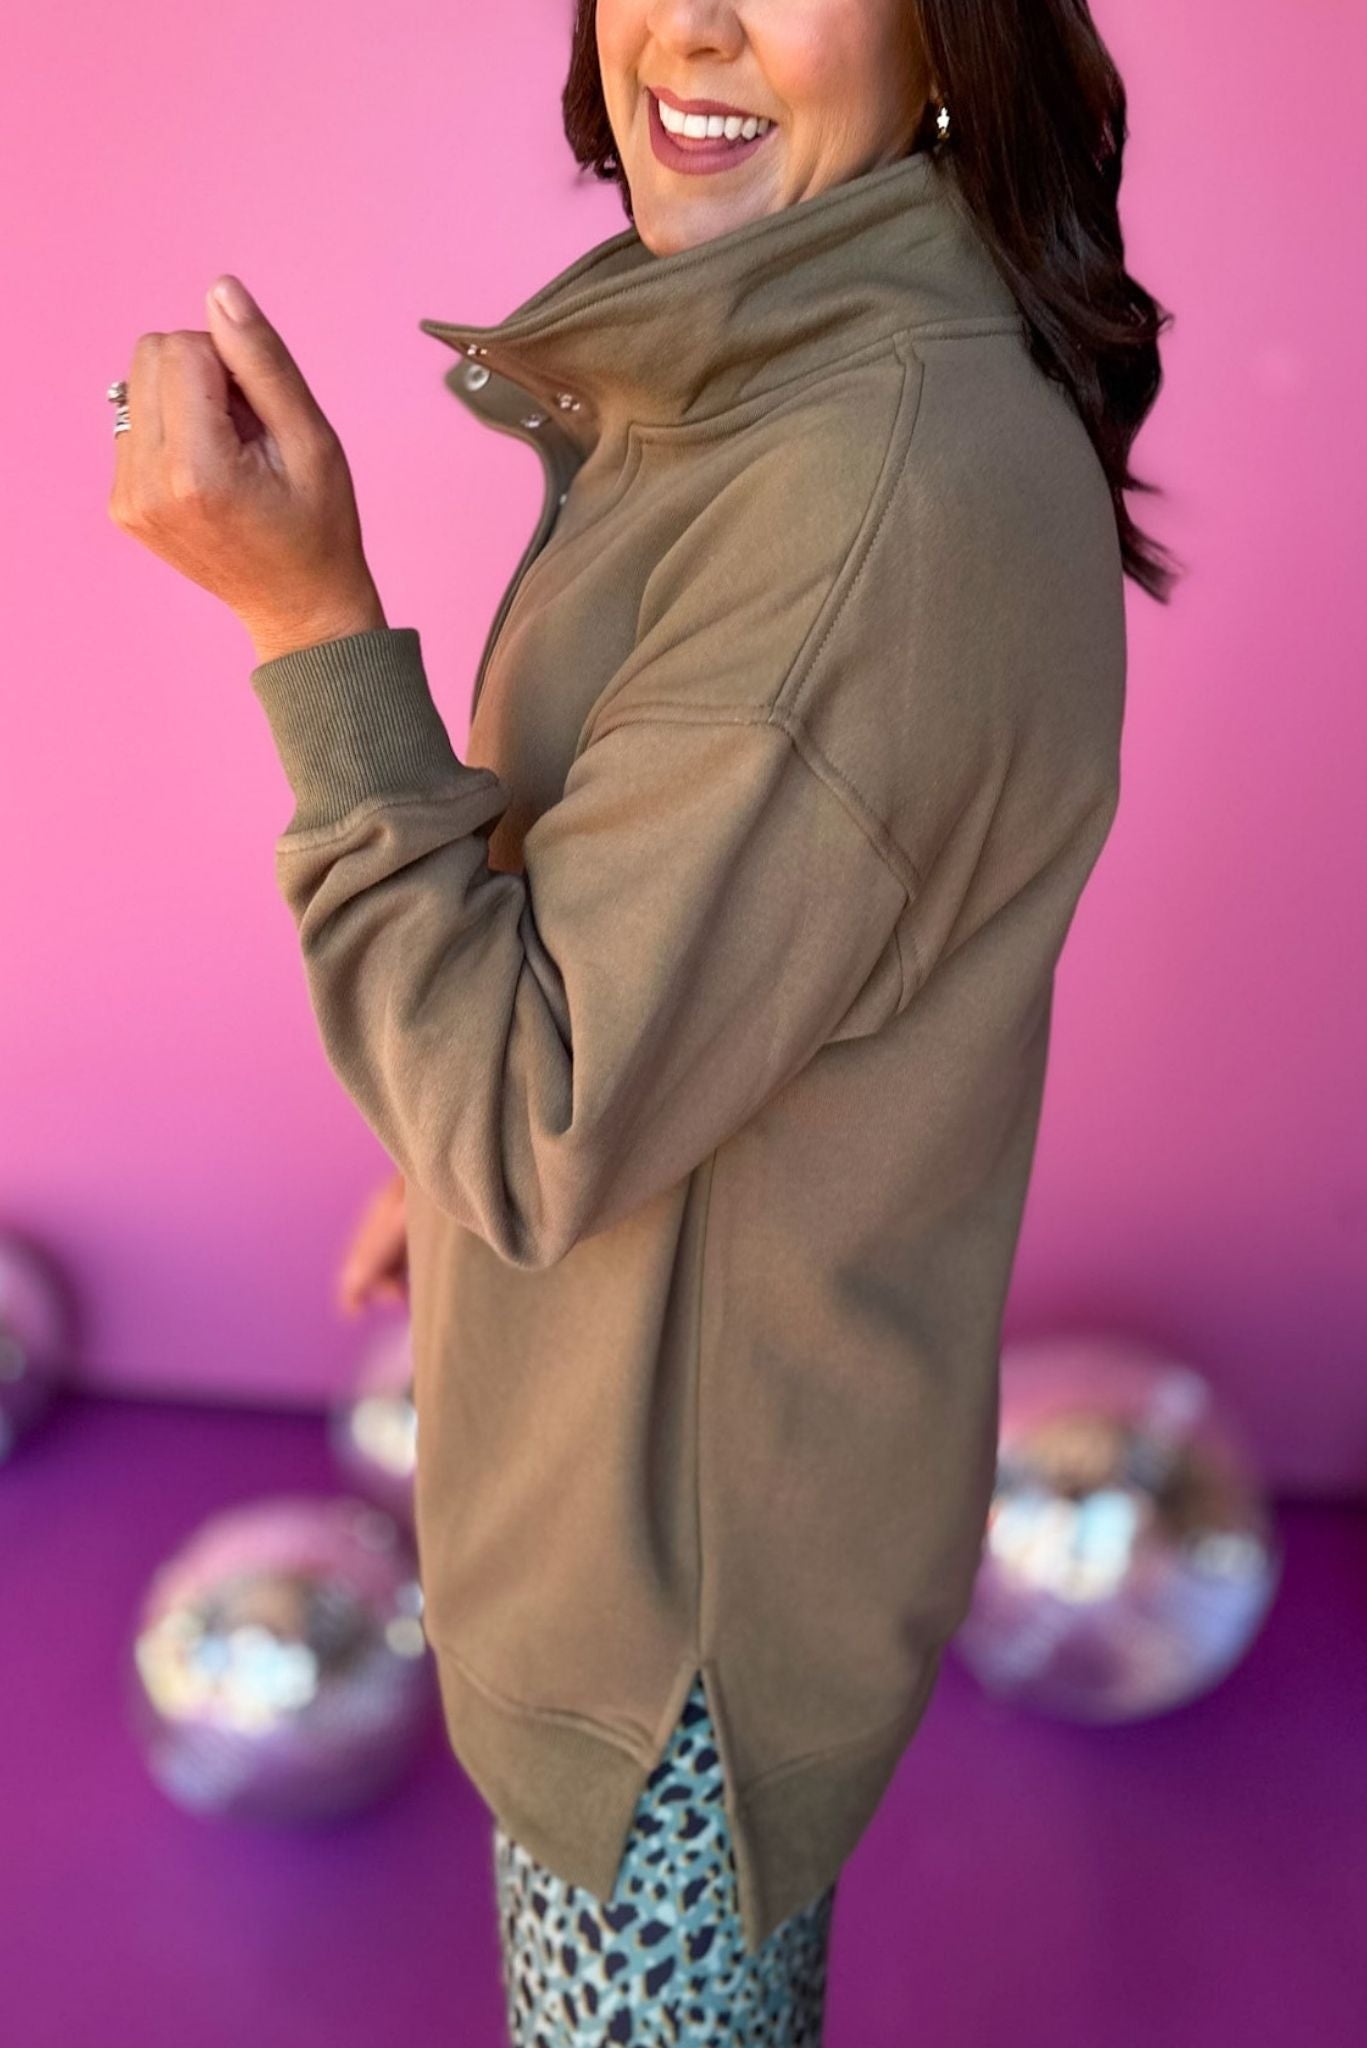 SSYS The Natalie Pullover In Olive, must have pullover, must have athleisure, elevated style, elevated athleisure, mom style, active style, active wear, fall athleisure, fall style, comfortable style, elevated comfort, shop style your senses by mallory fitzsimmons